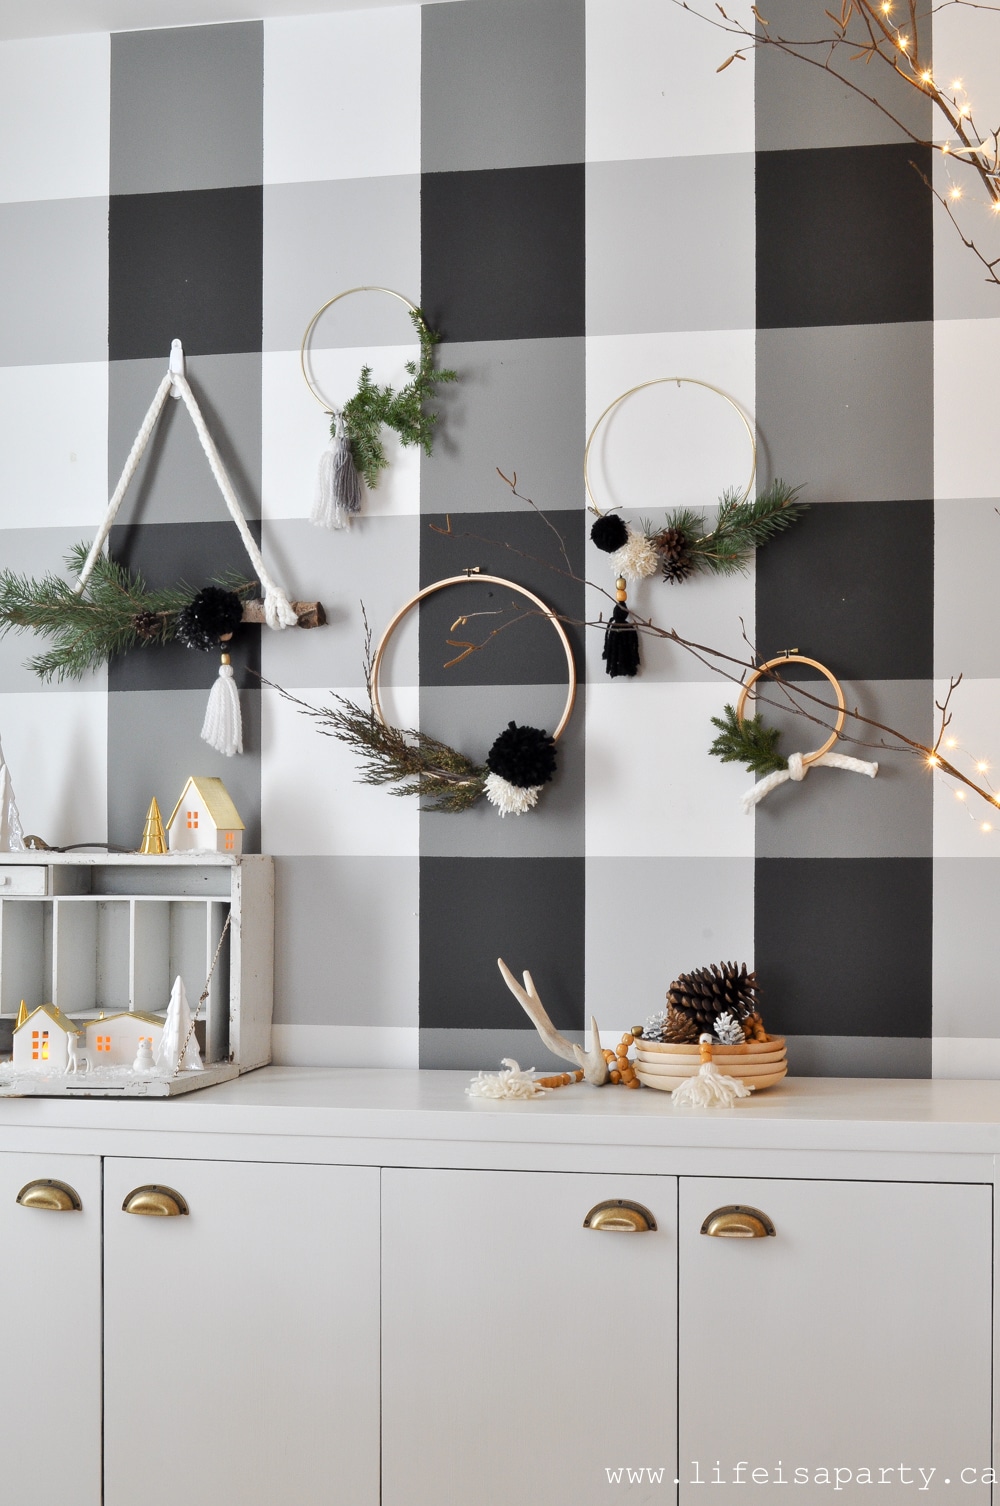 Christmas Home Tour 2018 -Black and White Scandinavian design with a little boho. Lots of natural elements, cozy texture and Christmas twinkle lights.